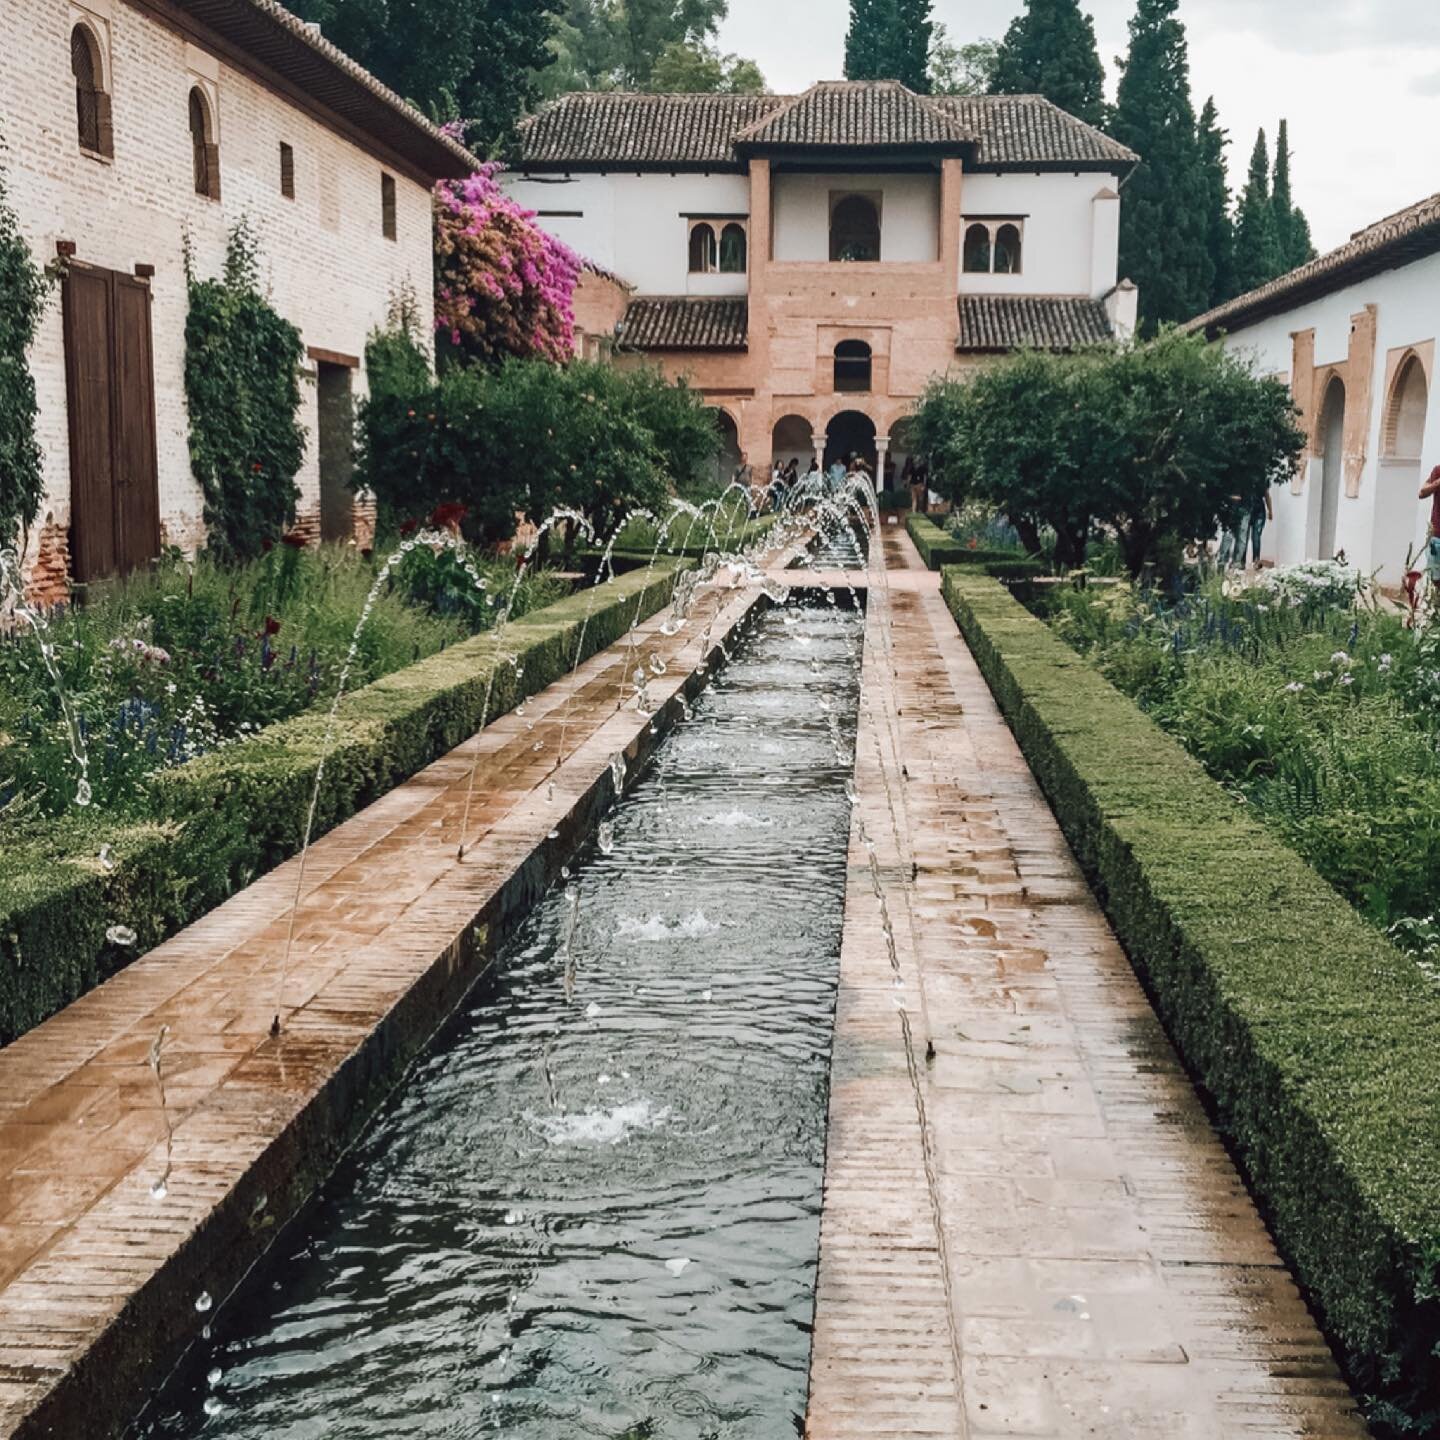 A tour of the Alhambra in Granada, with an amazing guide. This place really exceeded my expectations and so did the guide. The grounds are beautiful and immaculately maintained. 

Fun fact: we lived in a city called Alhambra in Los Angeles at the tim